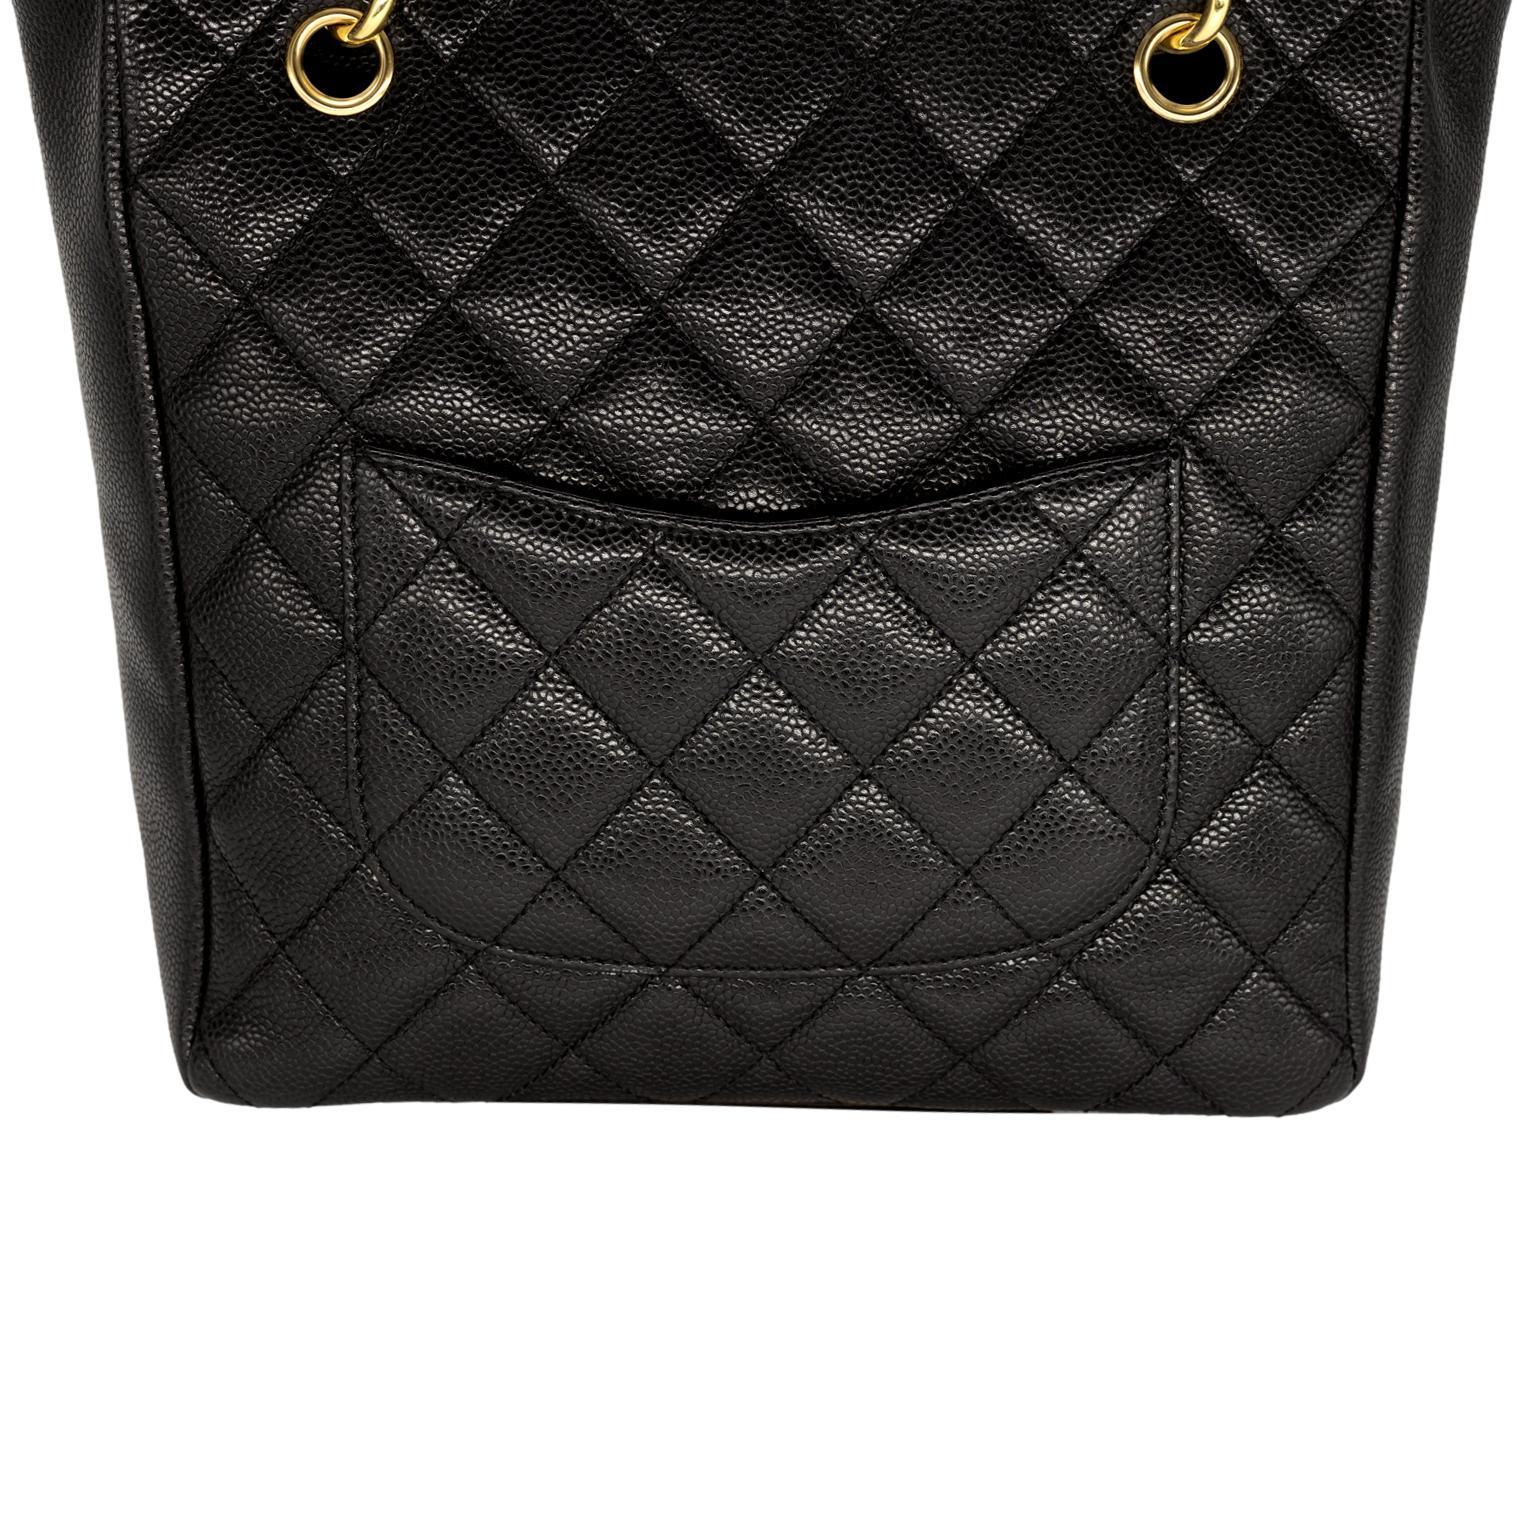 Chanel Black Quilted Caviar Petite Shopping Top Handle Tote Bag, 2008. 6